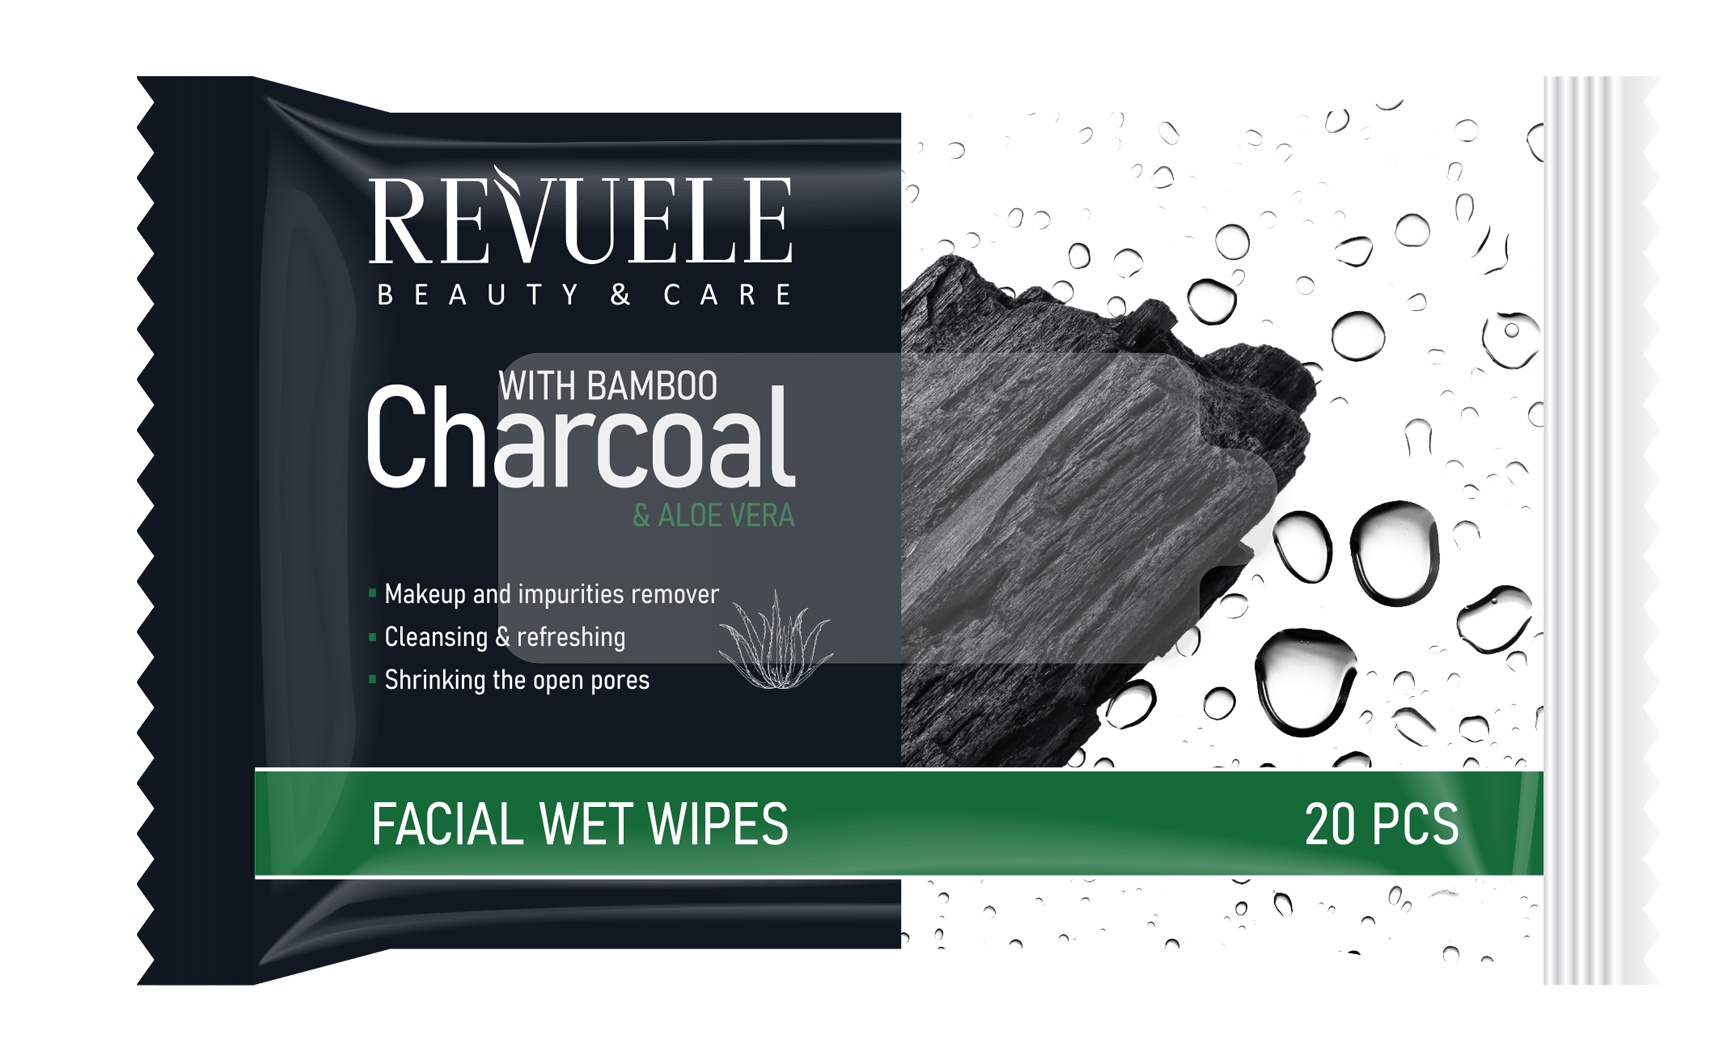 Revuele Bamboo Charcoal Facial Wet Wipes